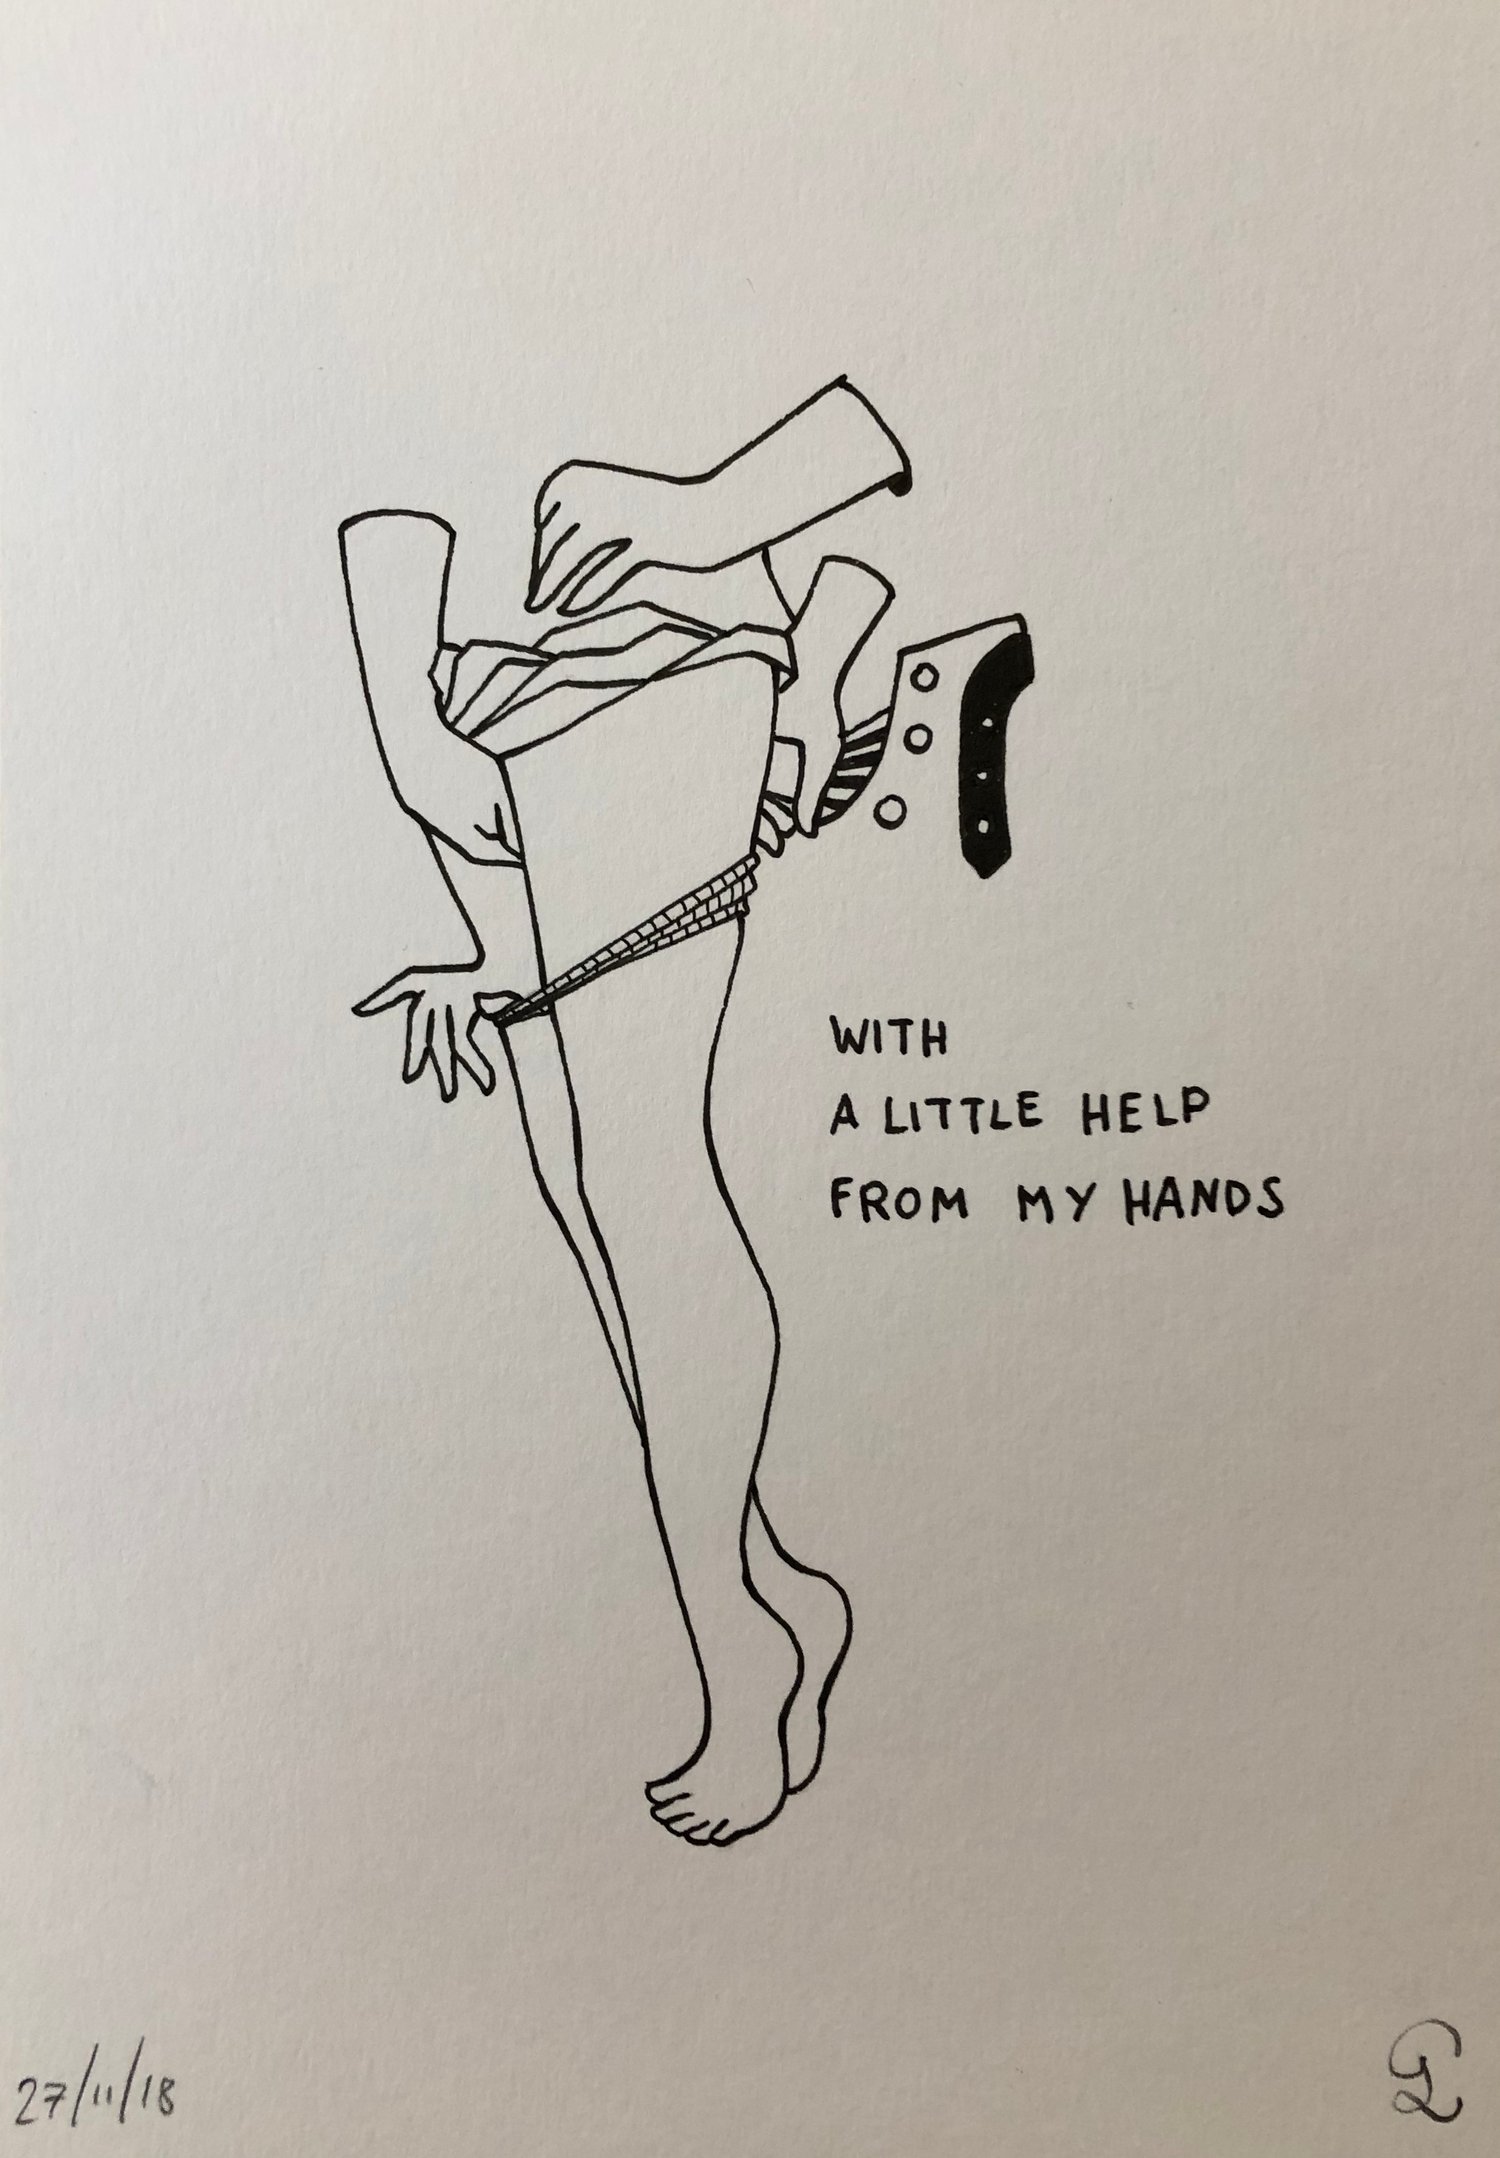 Petites Luxures - "With a little help from my hands"